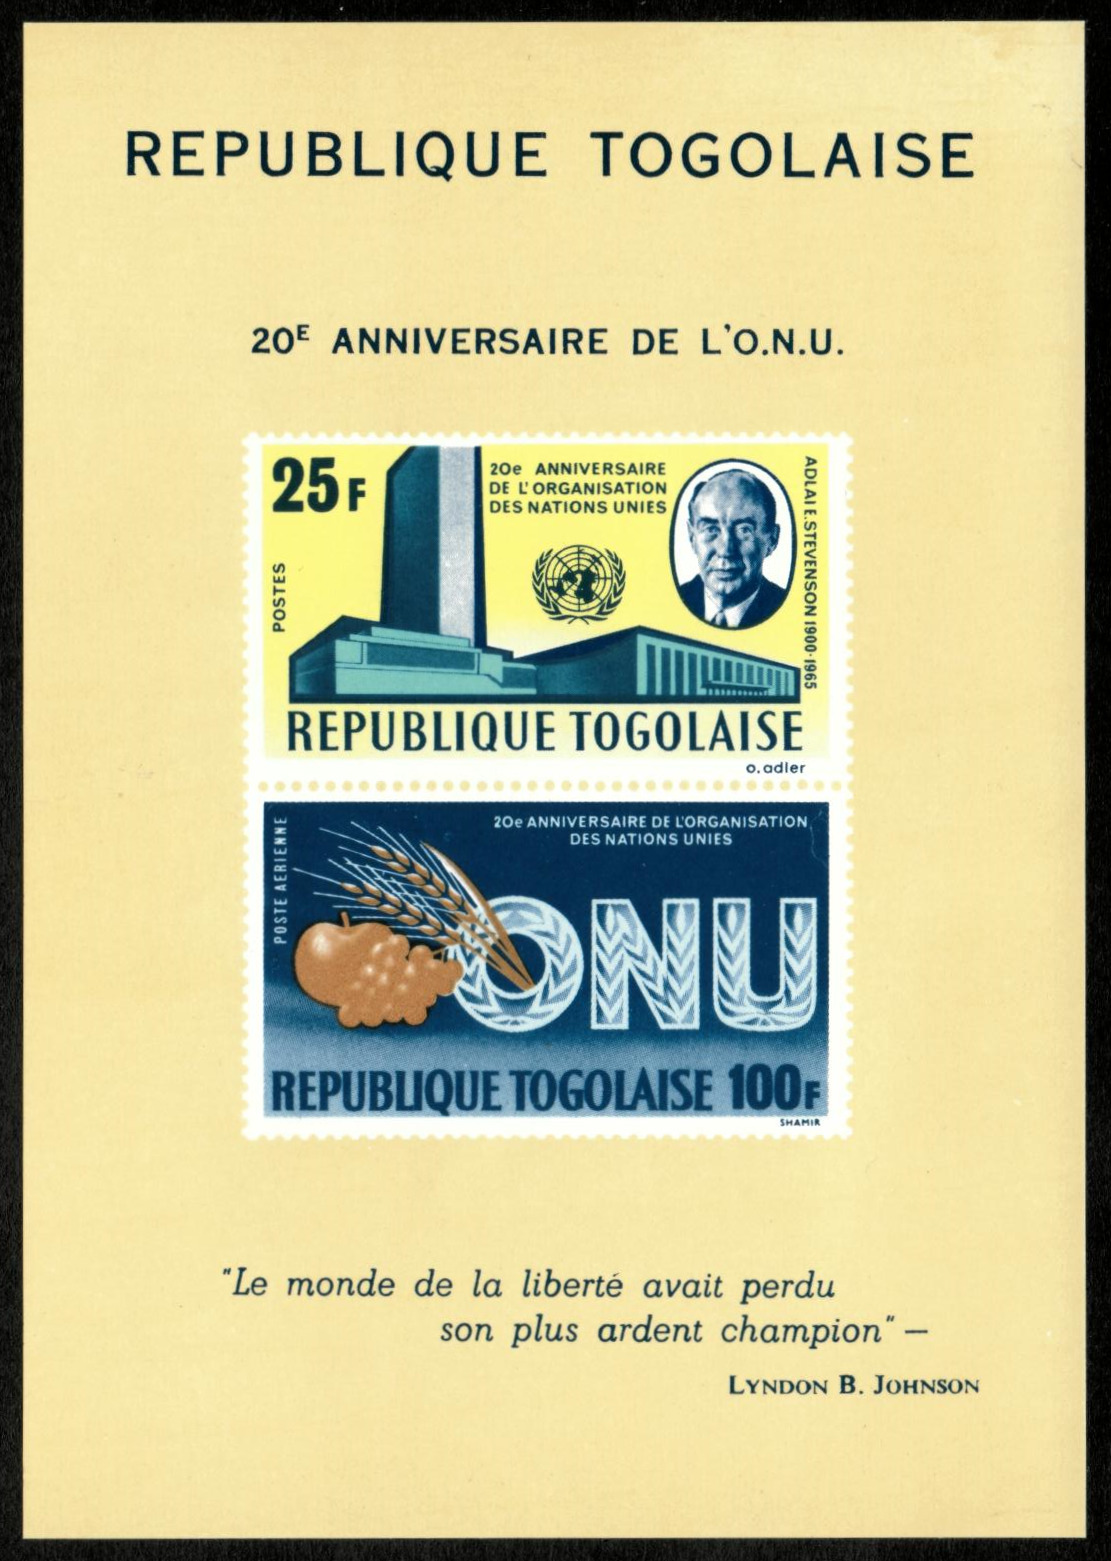 Togo 1965 - United Nations, 20 Years - Imperf Souvenir Sheet - Scott C48a - Mnh